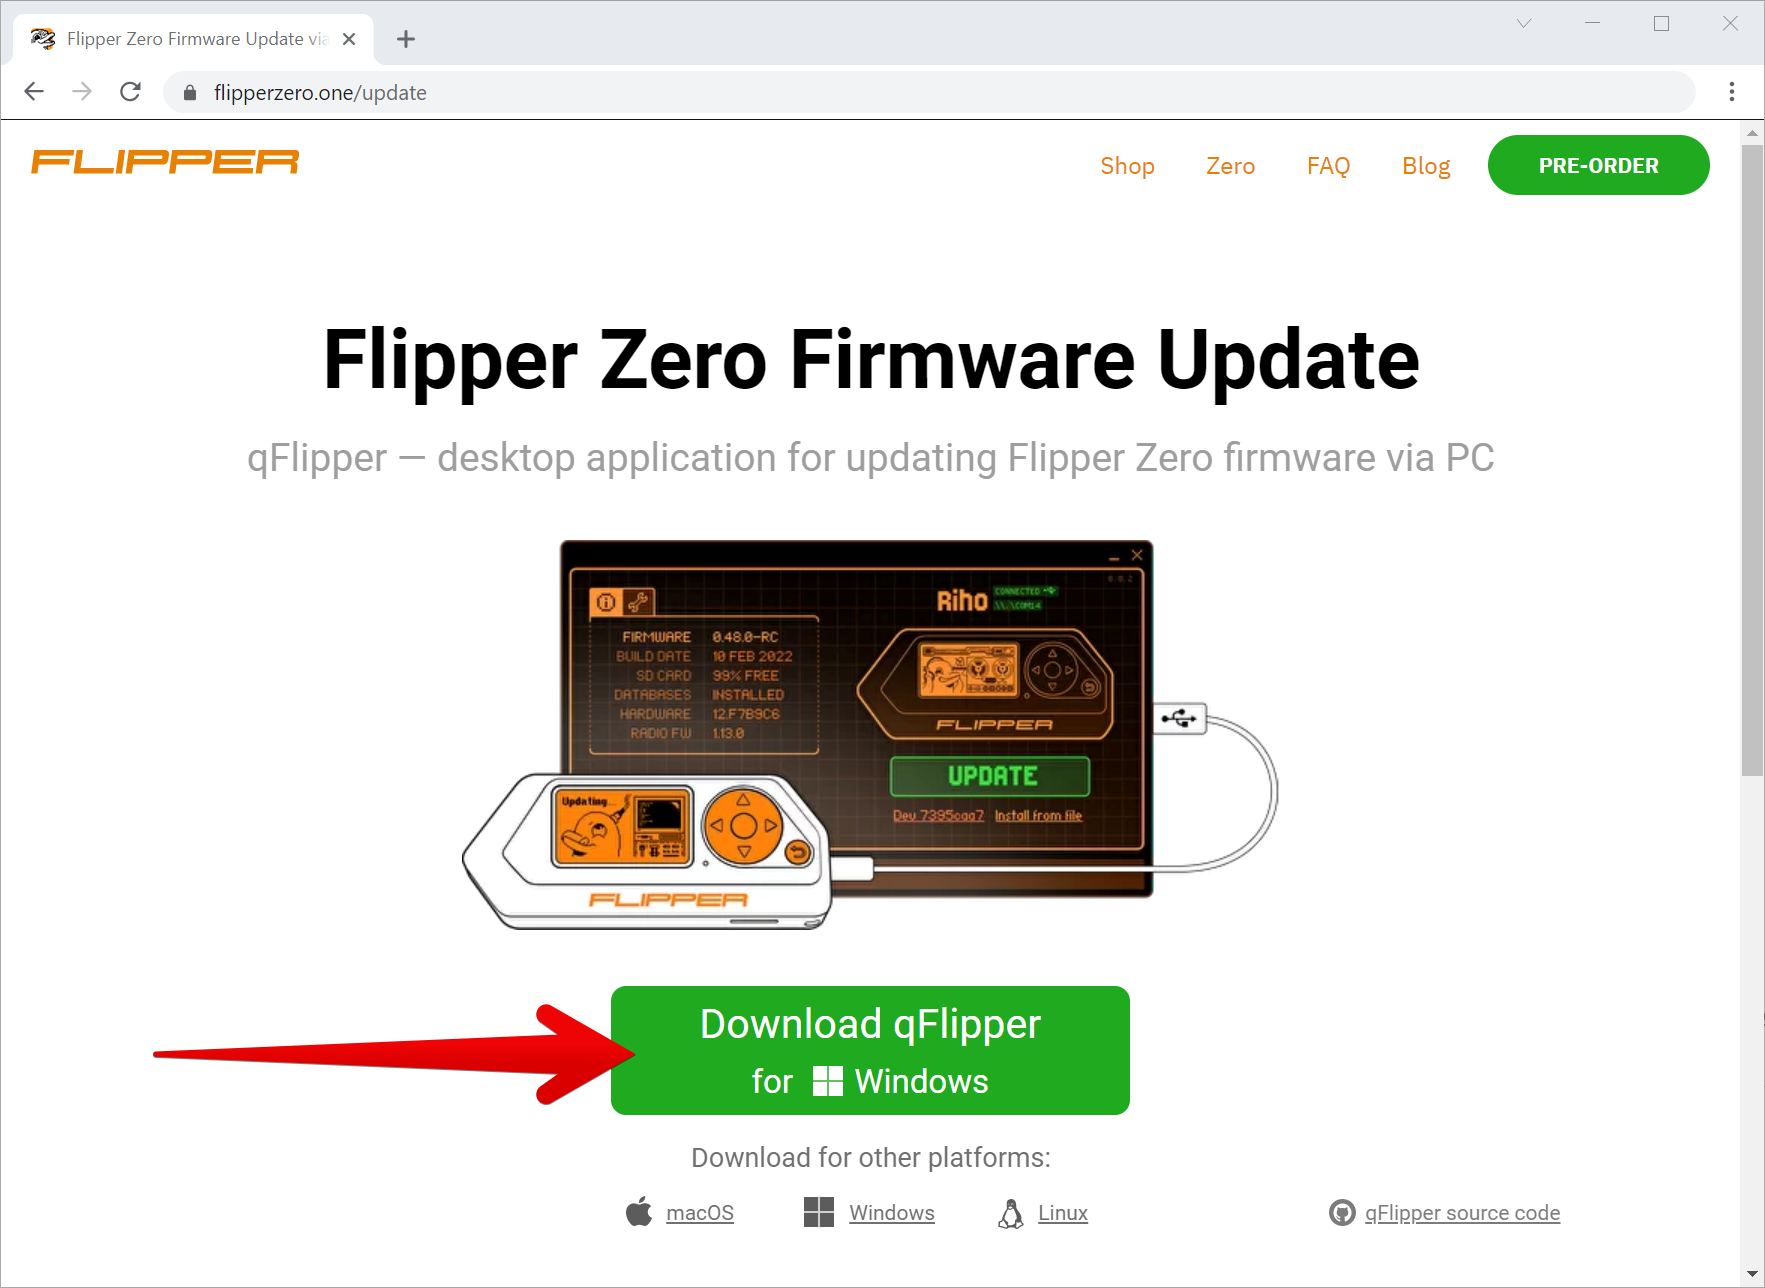 qFlipper download page